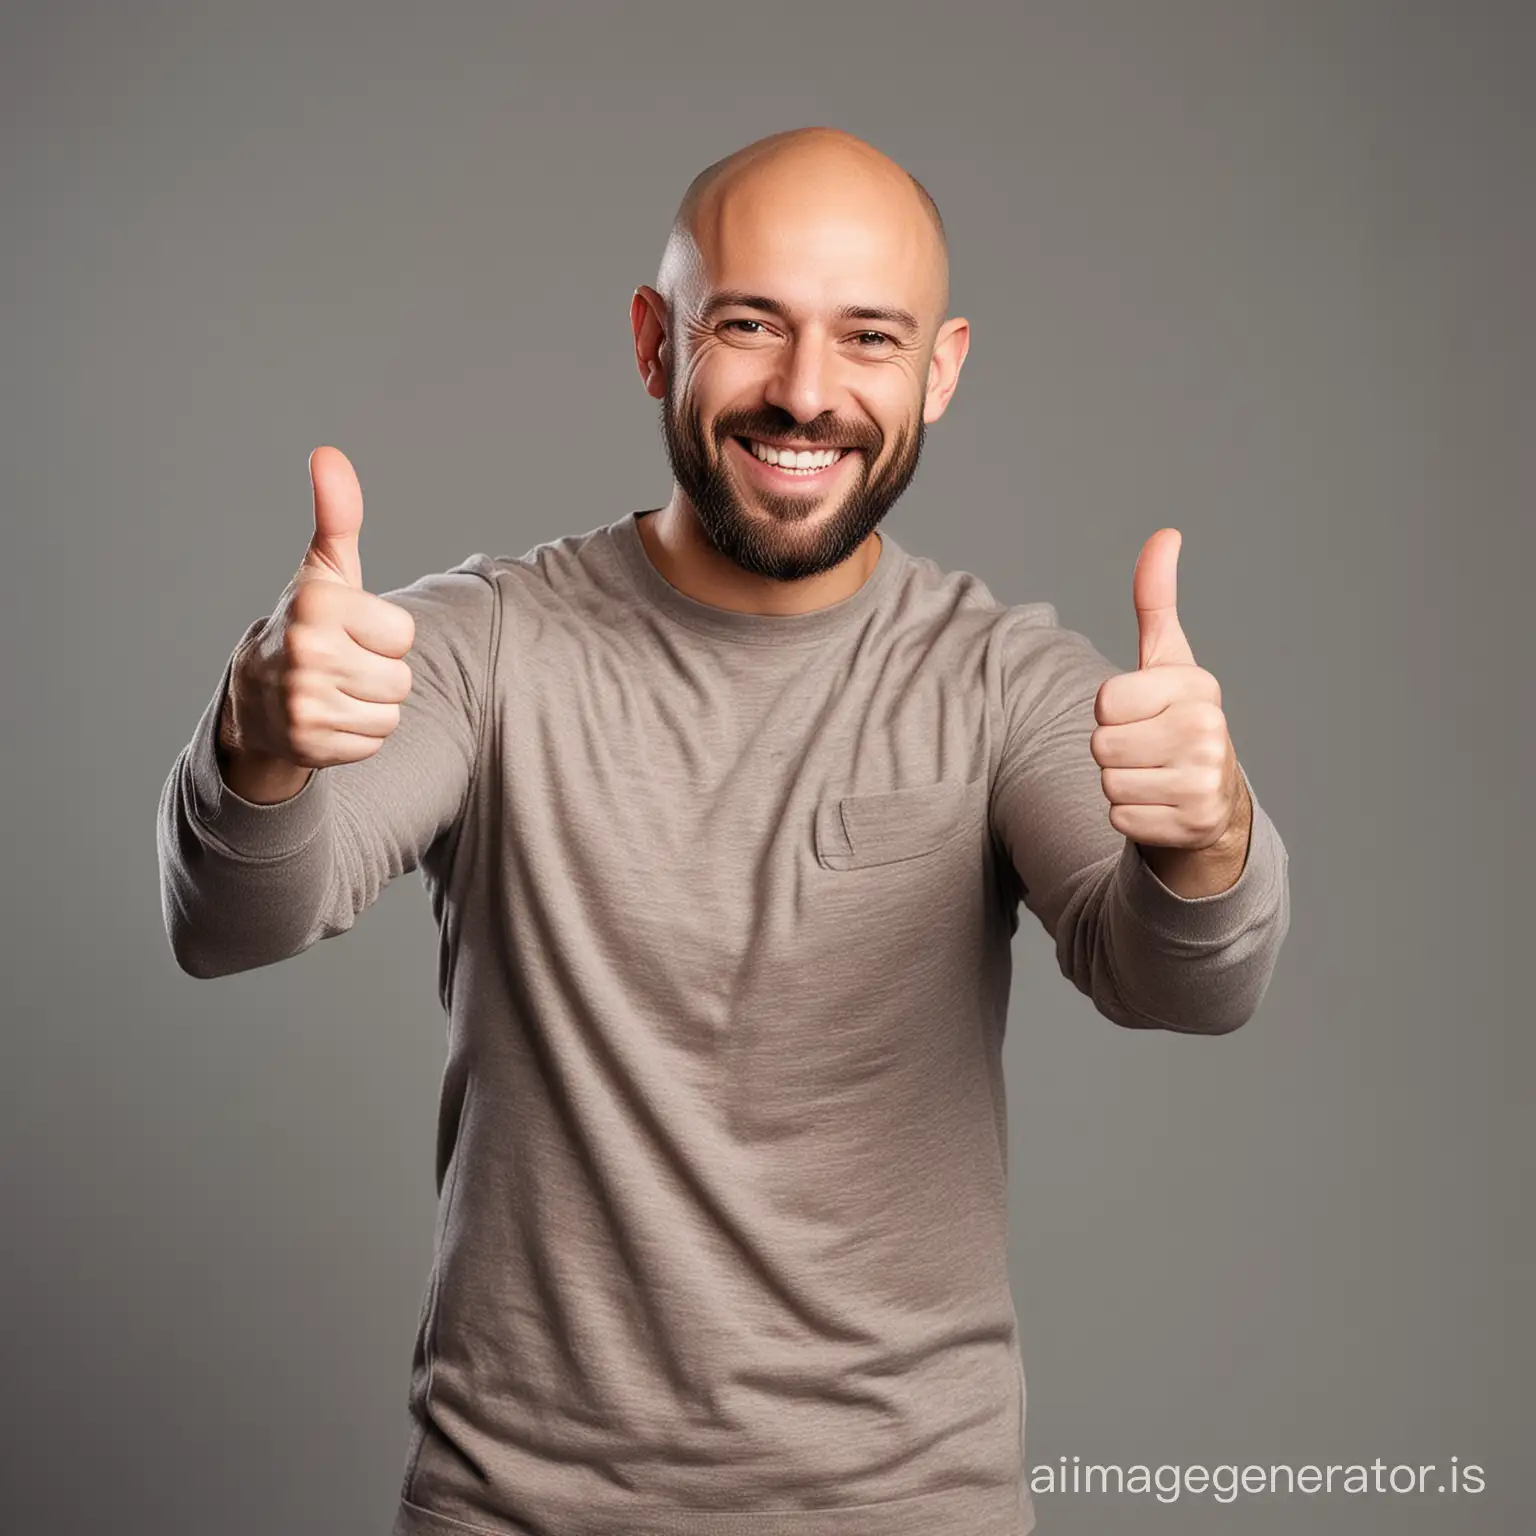 Bald man with short beard with thumbs up smiling